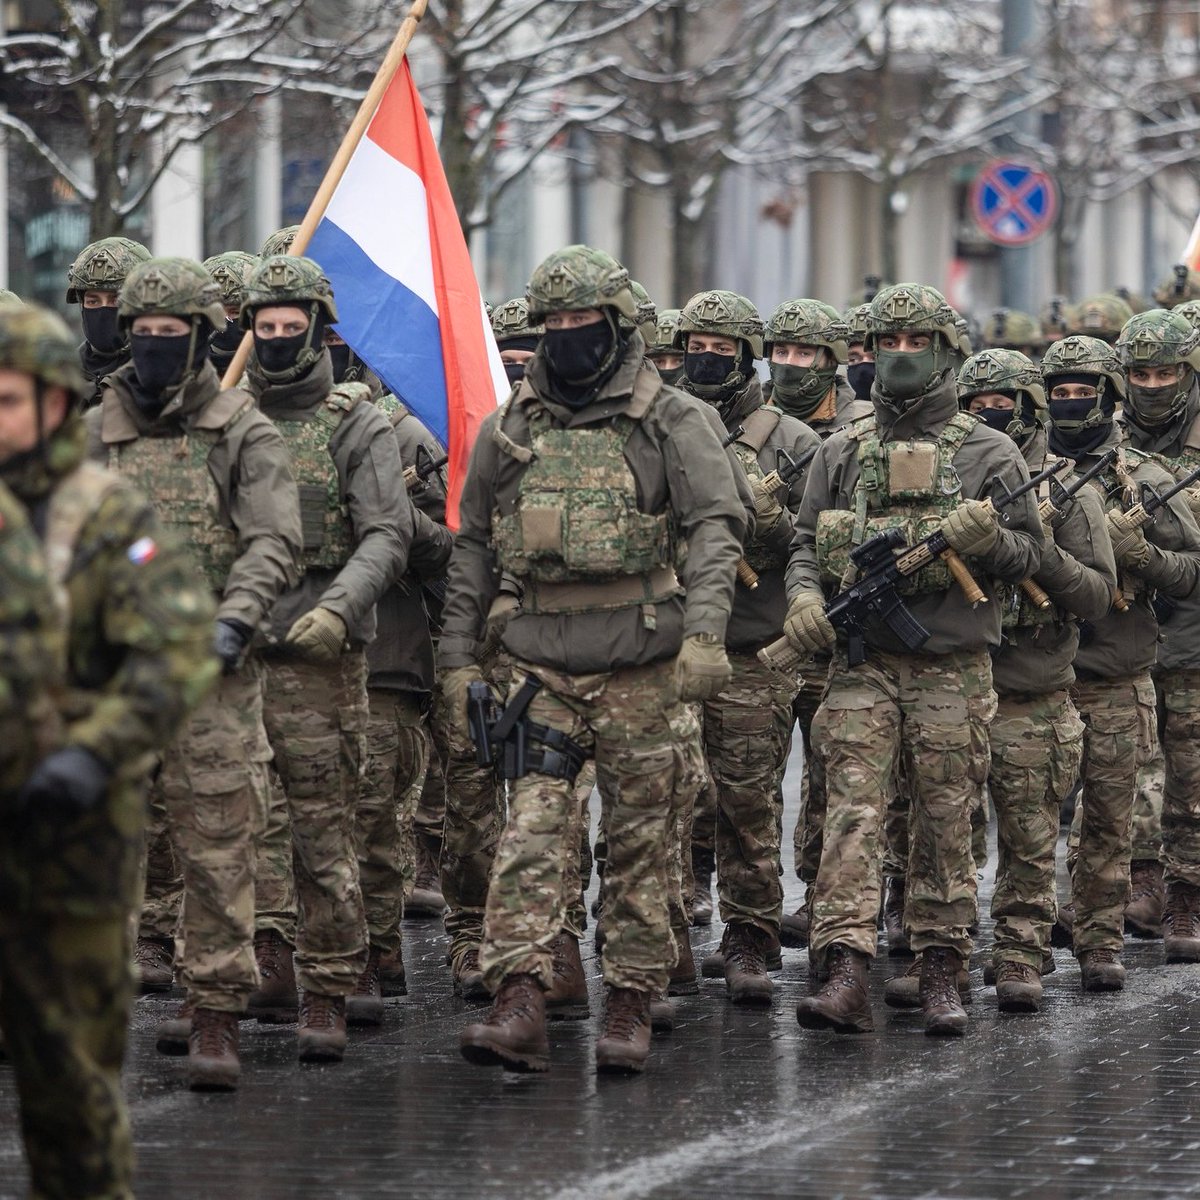 🇱🇹🇳🇱Happy King’ Day, #TheNetherlands! 
Gezellig Koningdag 🇳🇱! 
The Contribution of the #Dutch soldiers to @BG_LTU_eFP  is very significant for the security of #Lithuania and the #EasternFlank of the Alliance. 
#WeAreNATO 
#StrongTogether